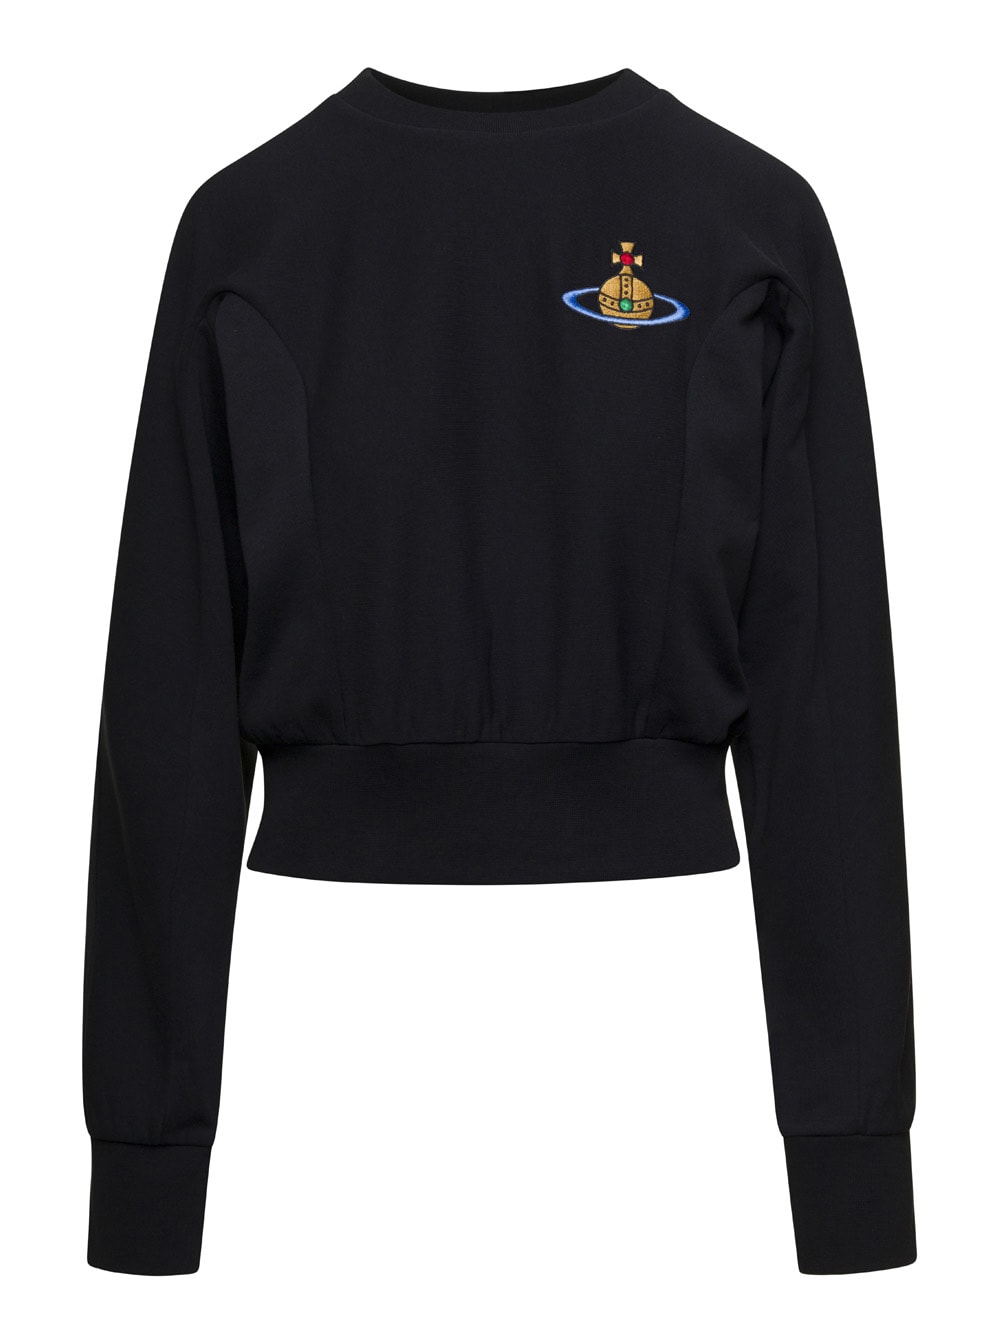 Black Crewneck Sweatshirt With Embroidered Orb Logo In Cotton Woman